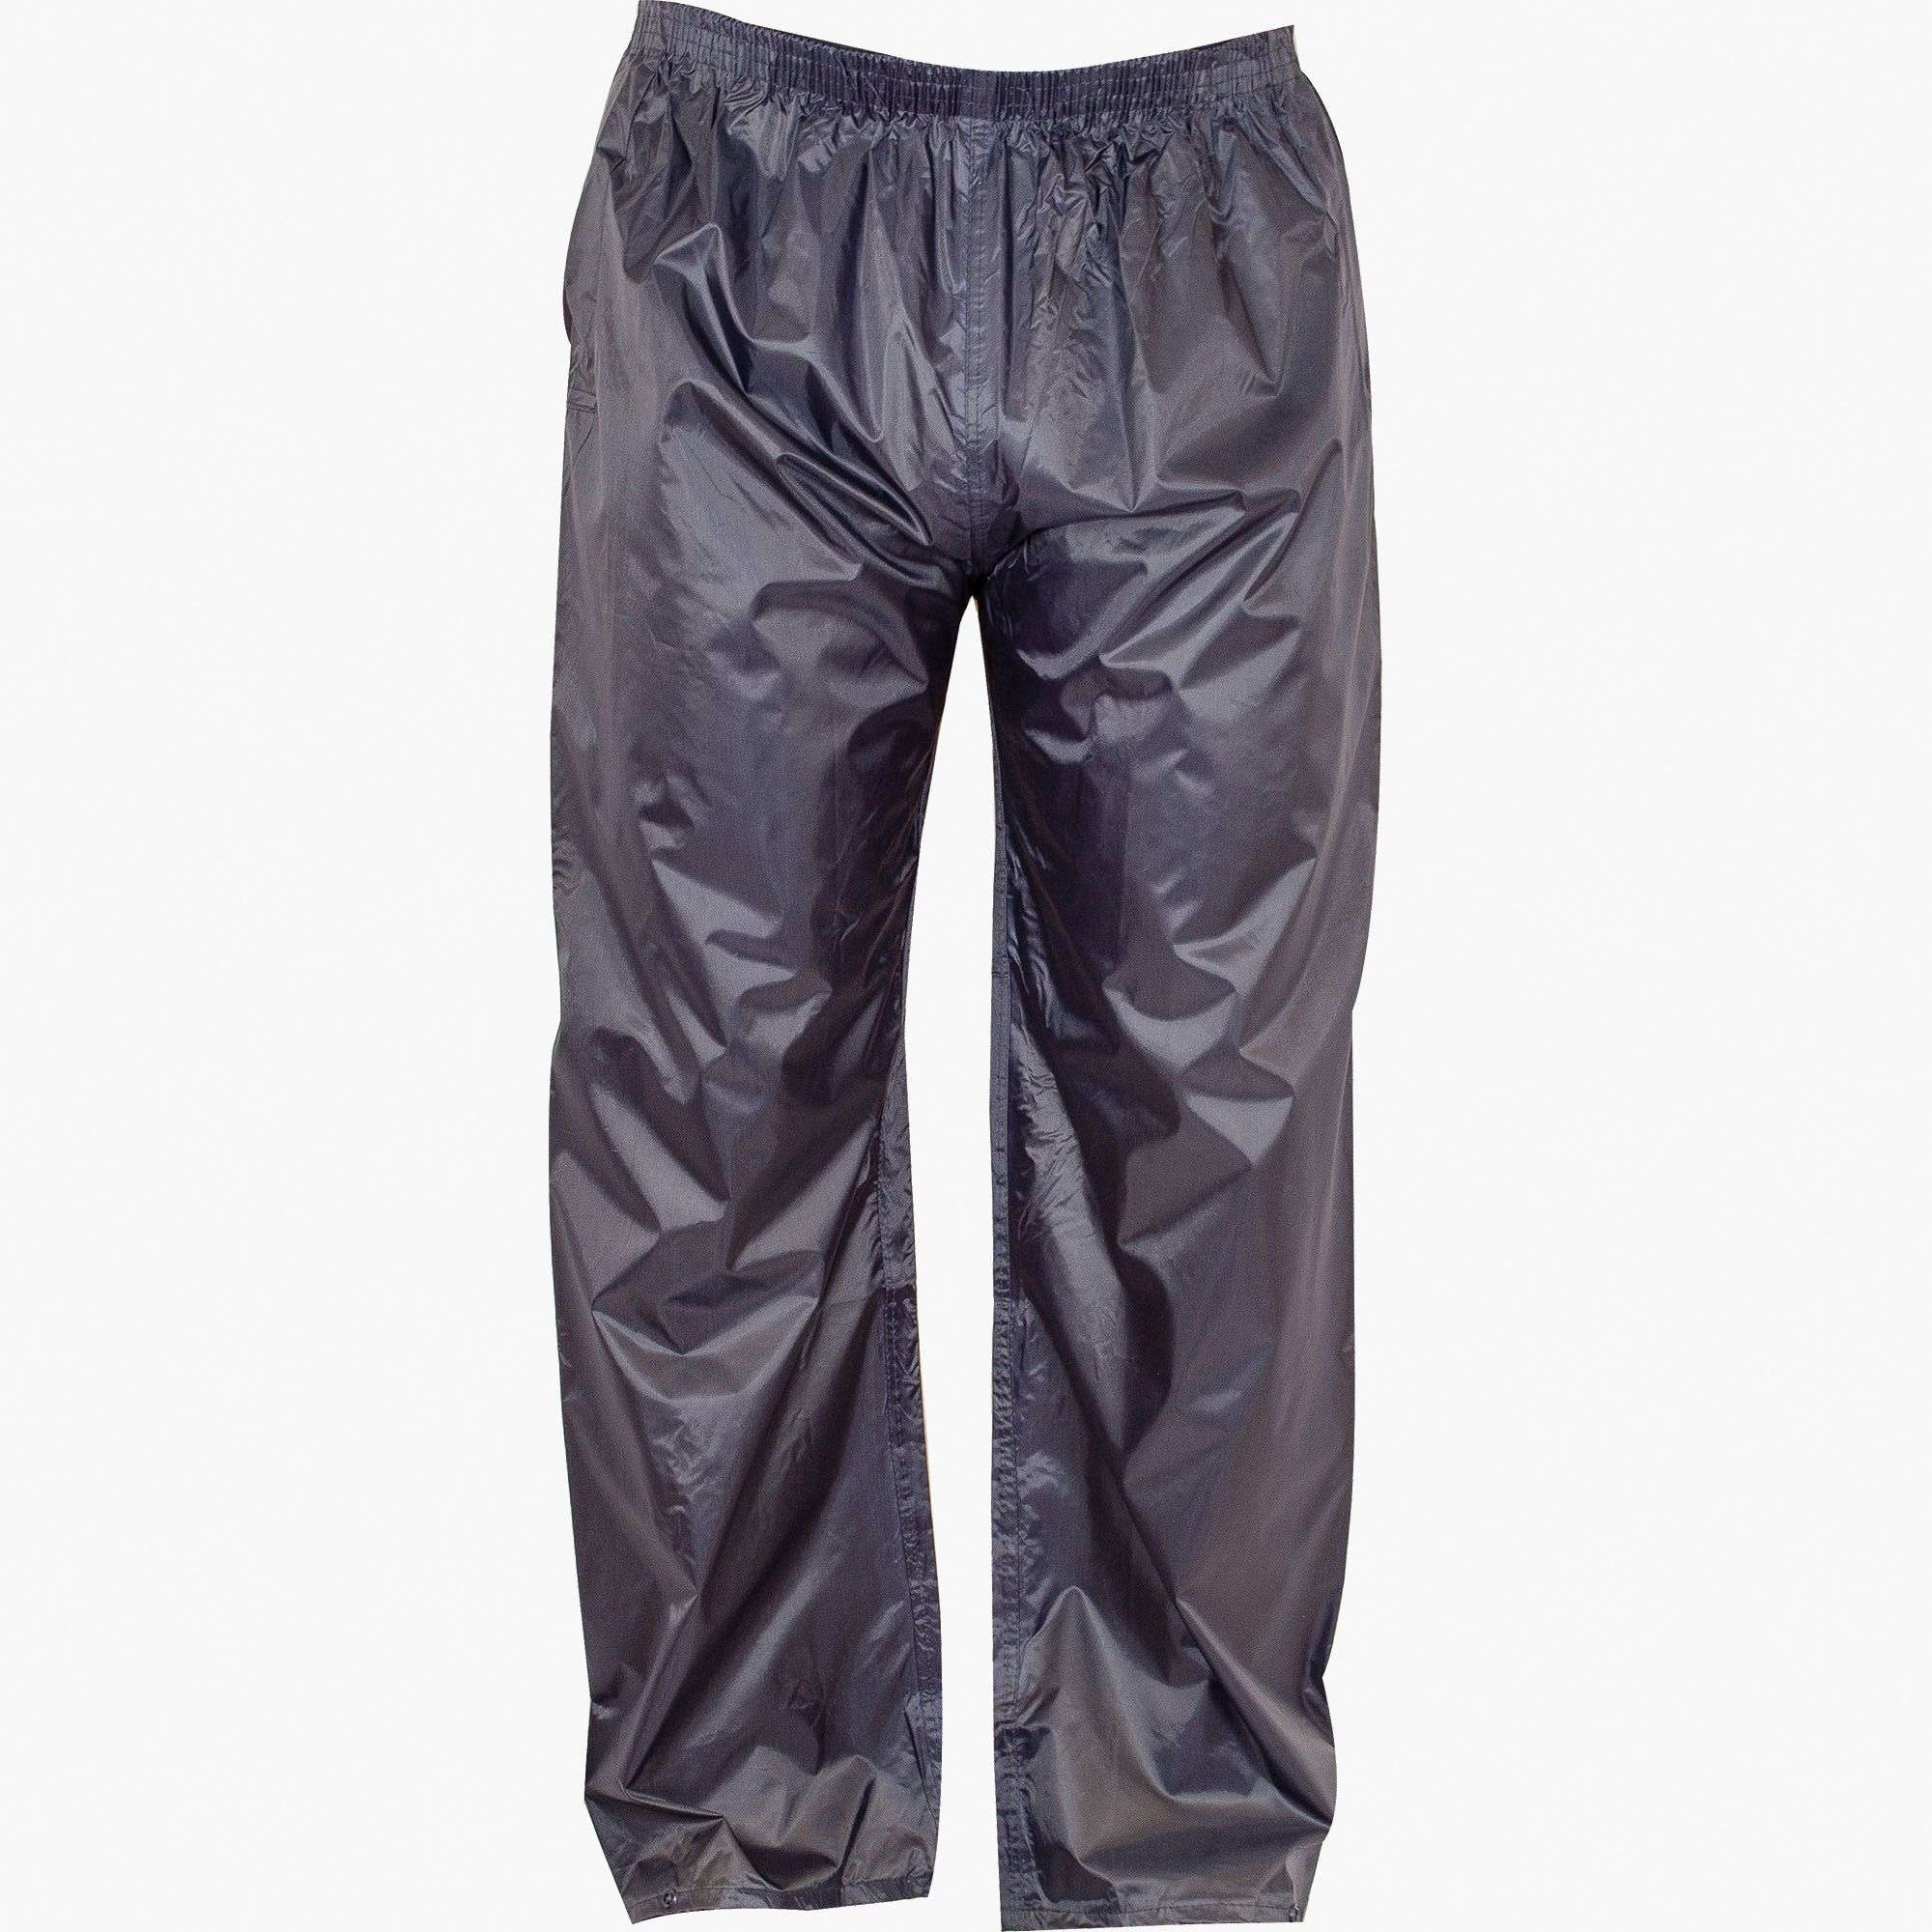 Highlander, Highlander - Stormguard Trousers, Trousers & Shorts,Wylies Outdoor World,